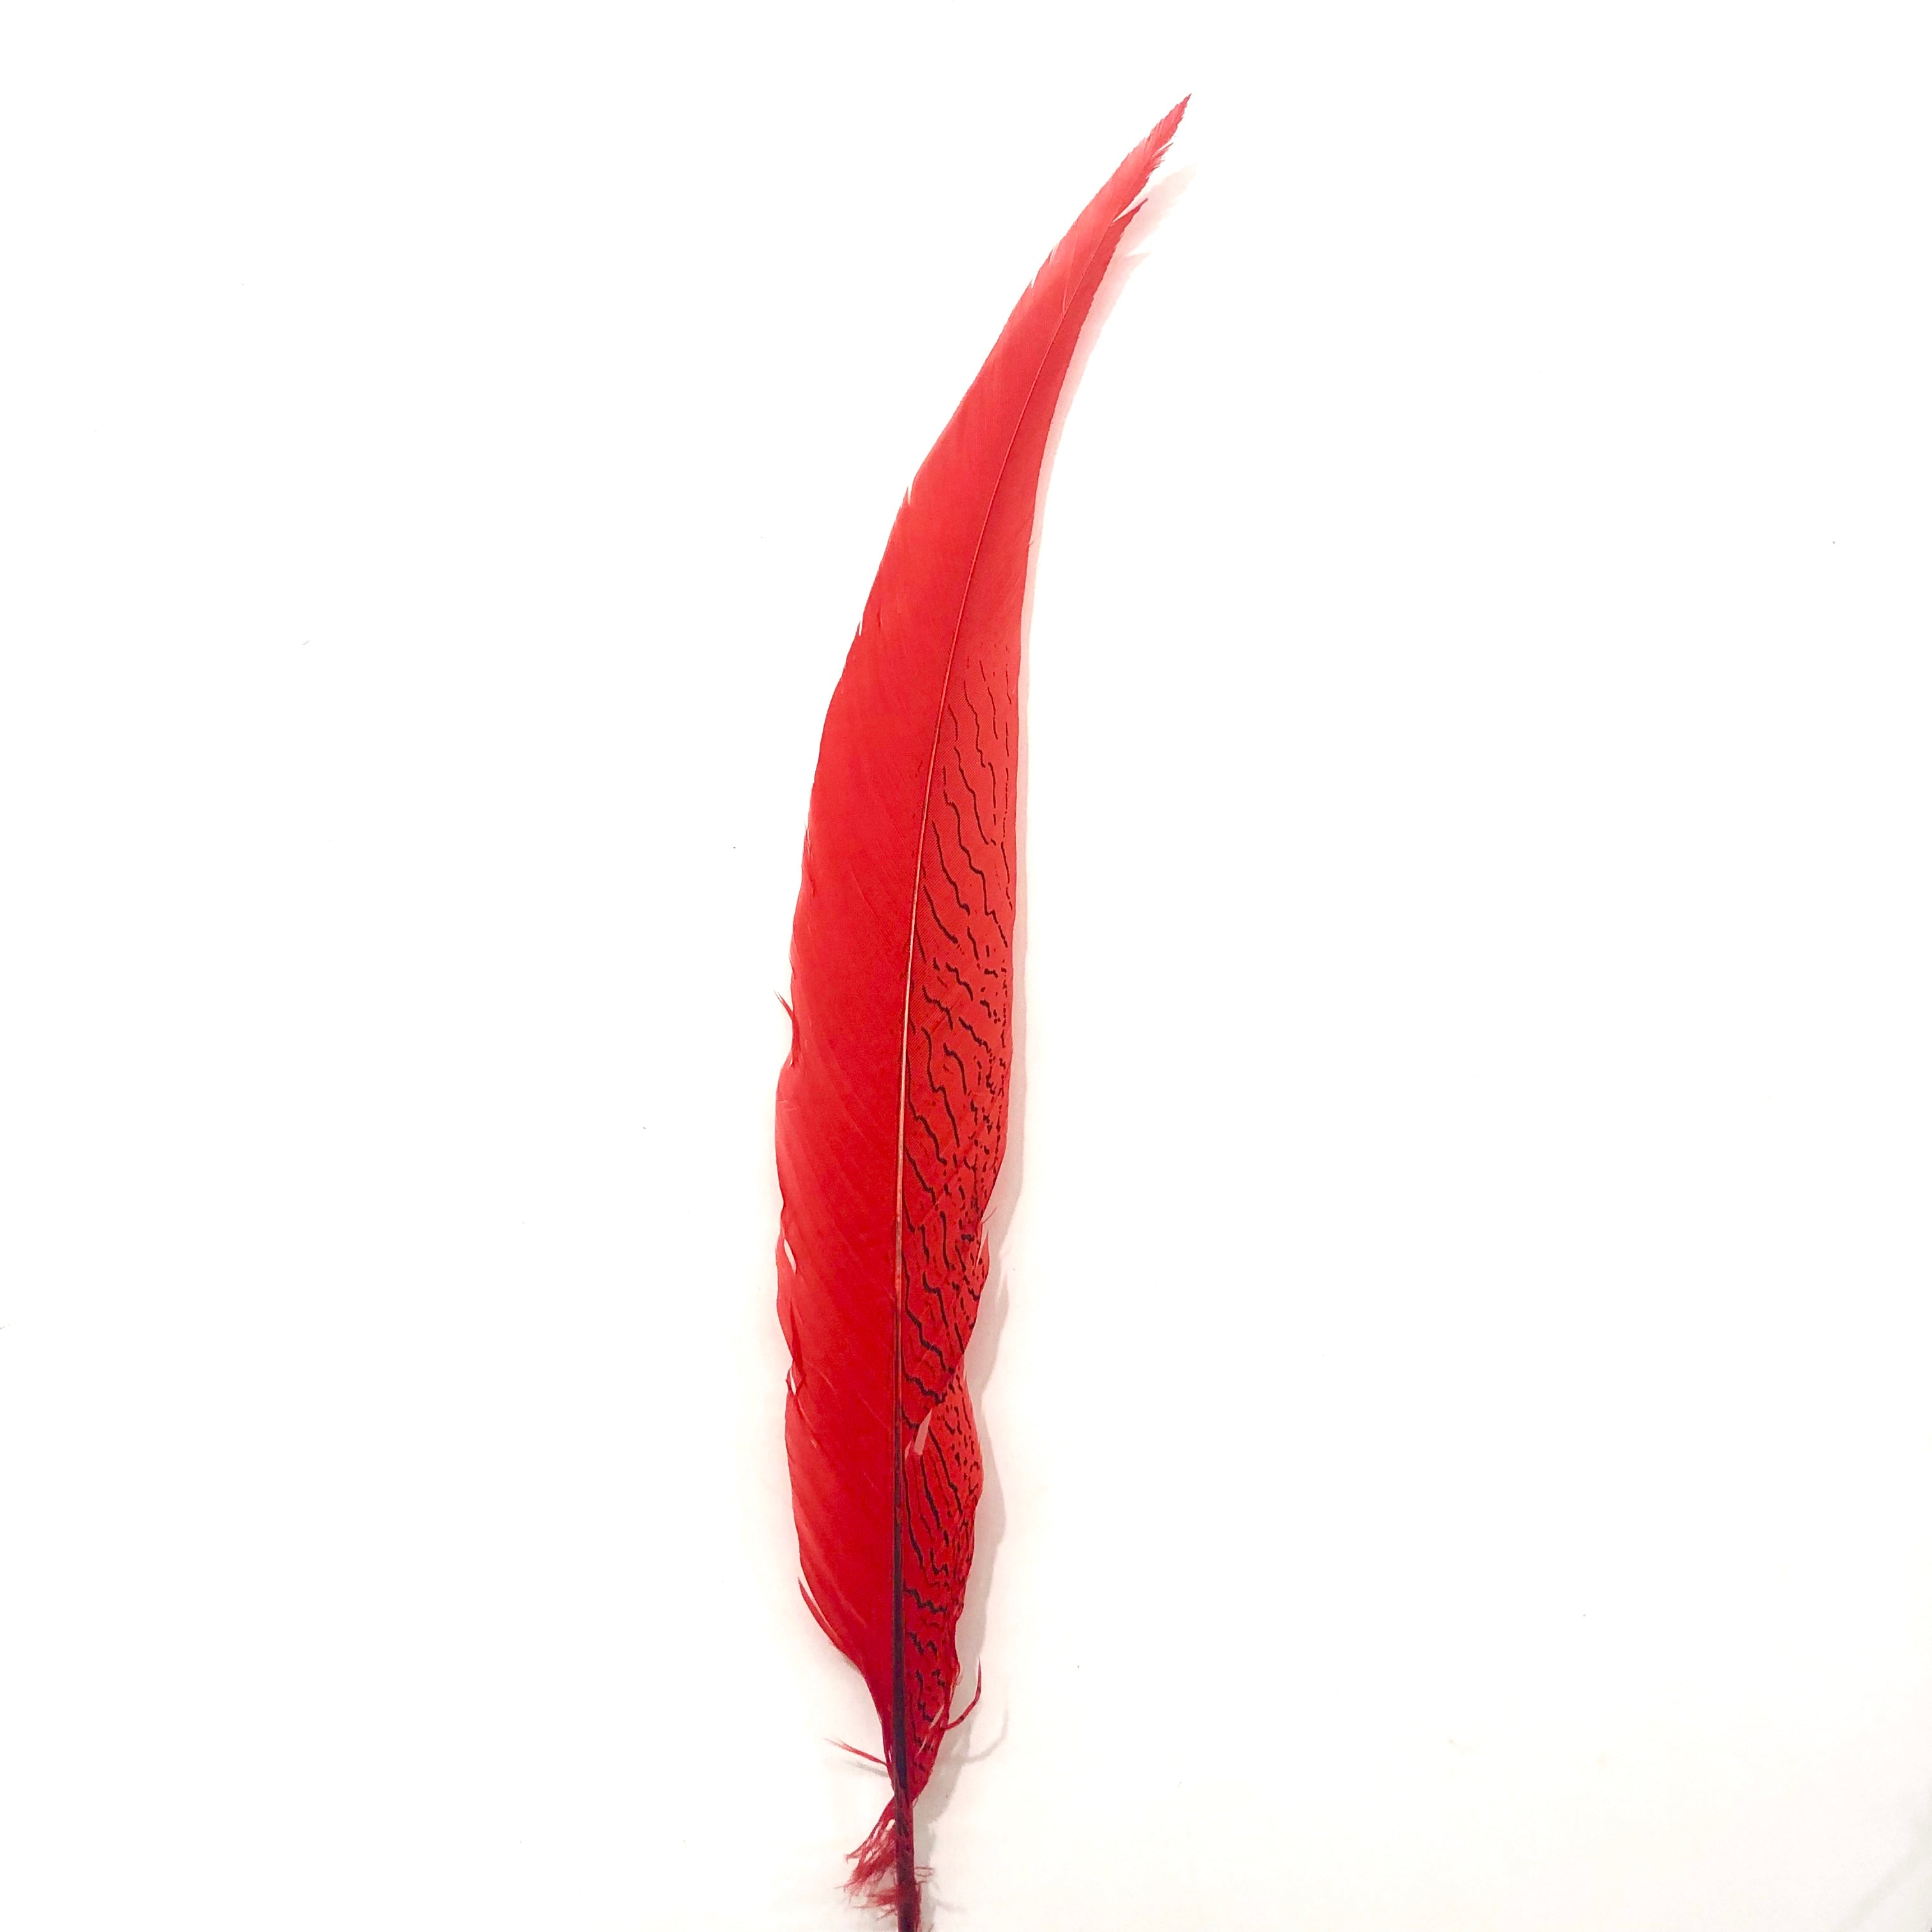 20" to 30" Silver Pheasant Tail Feather - Red